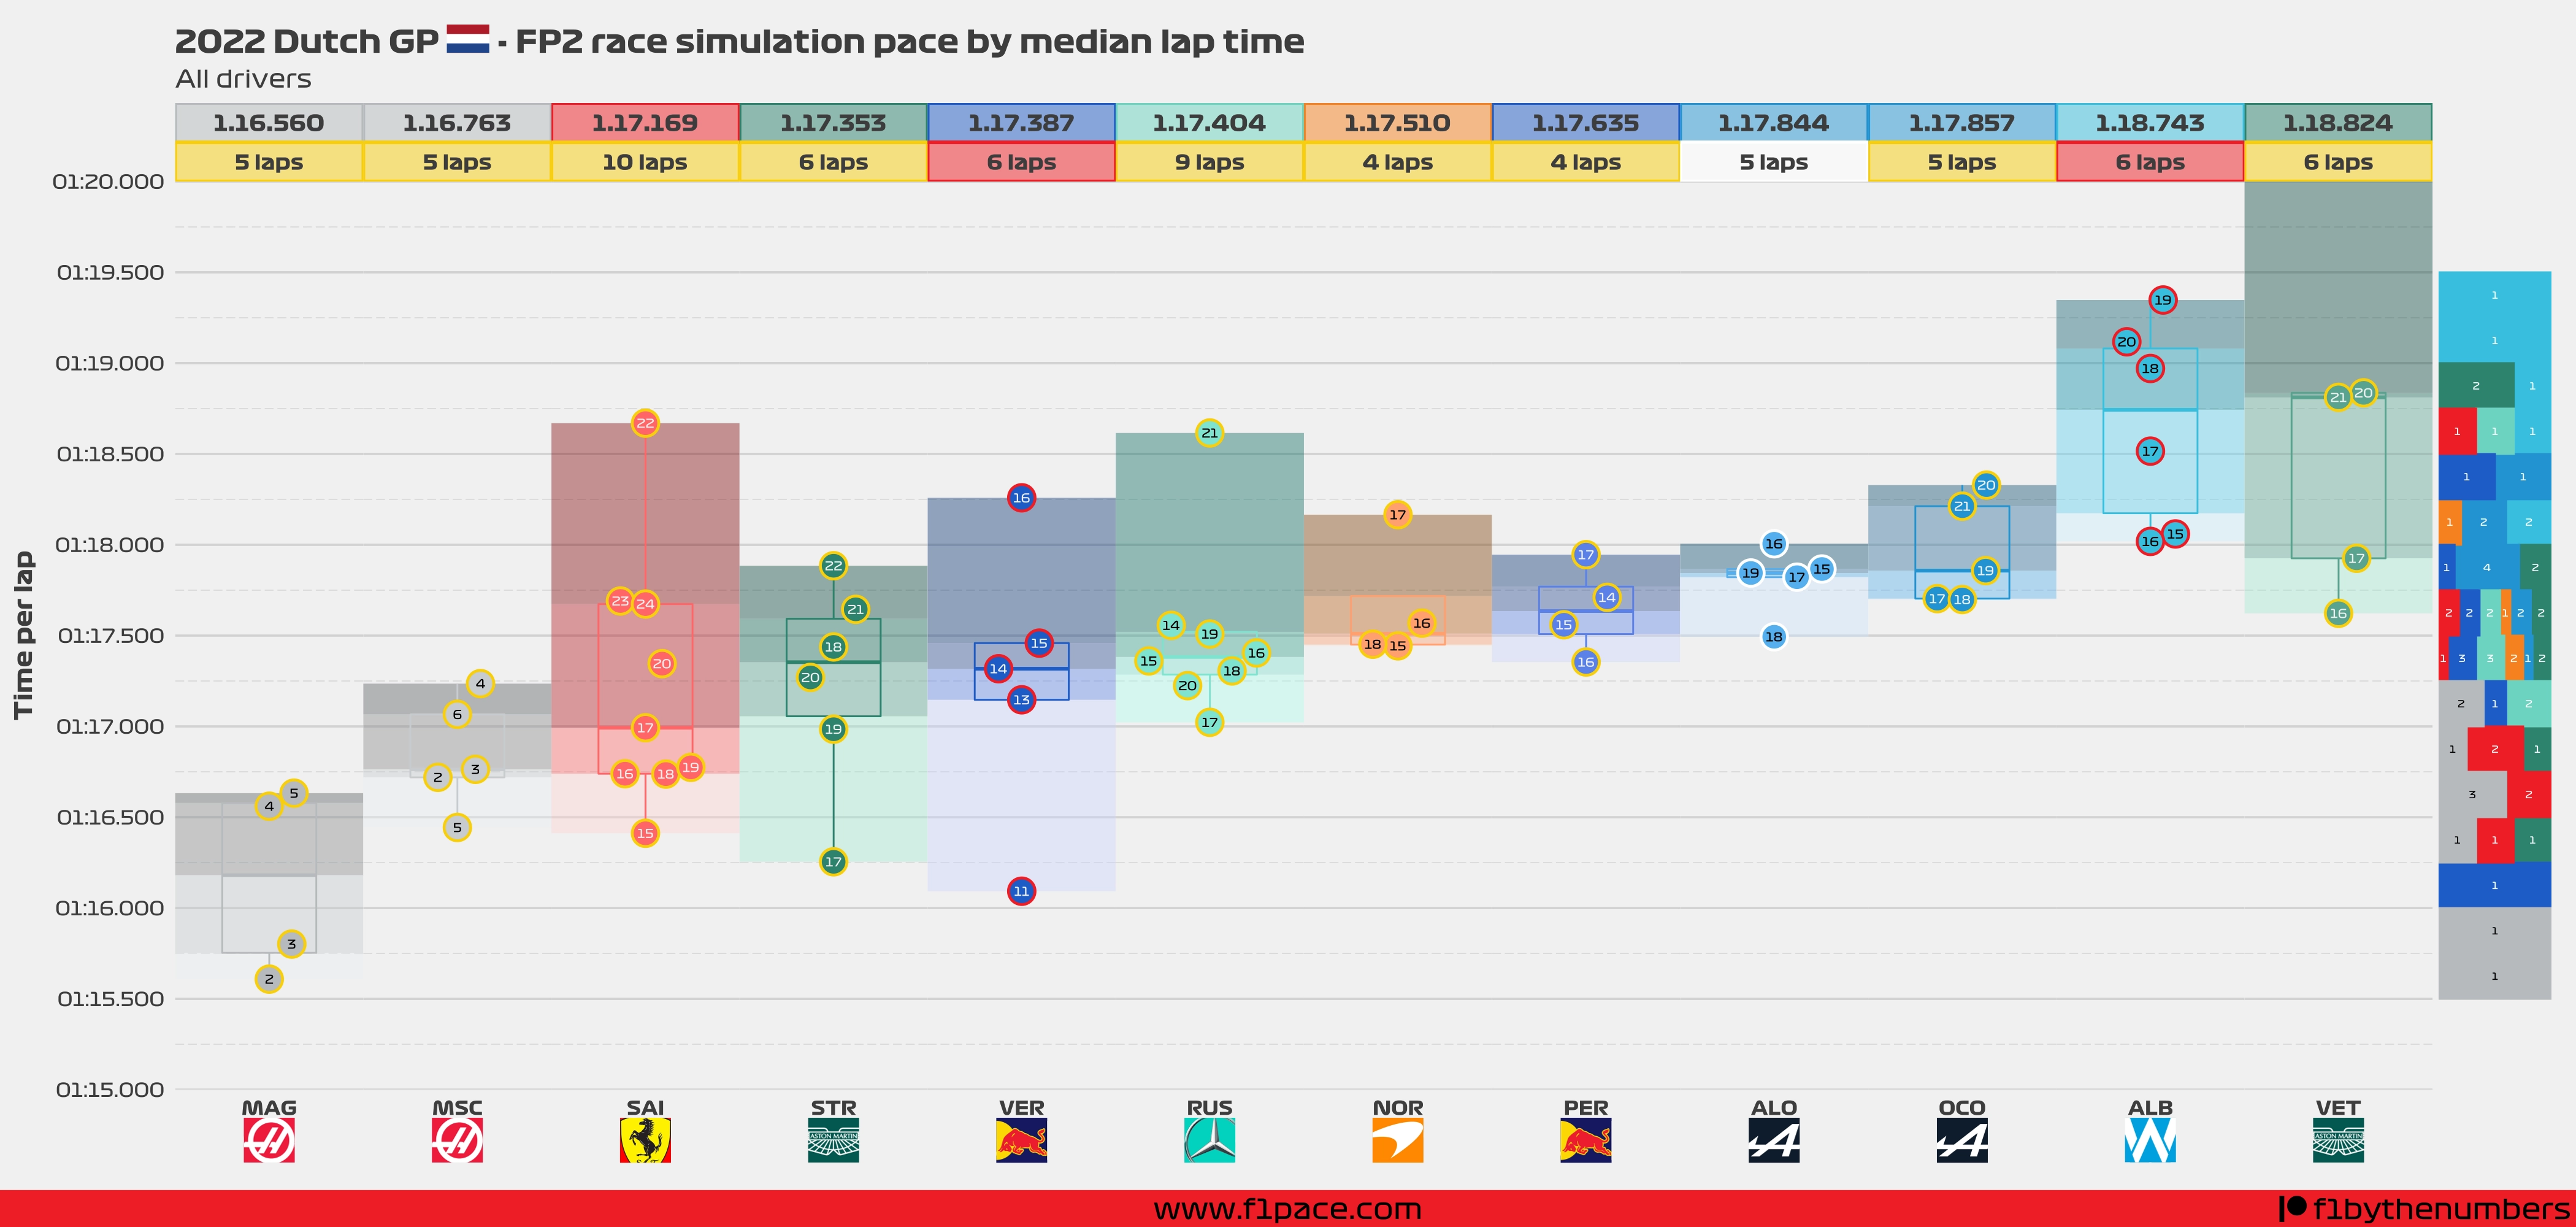 Race simulation pace: All drivers